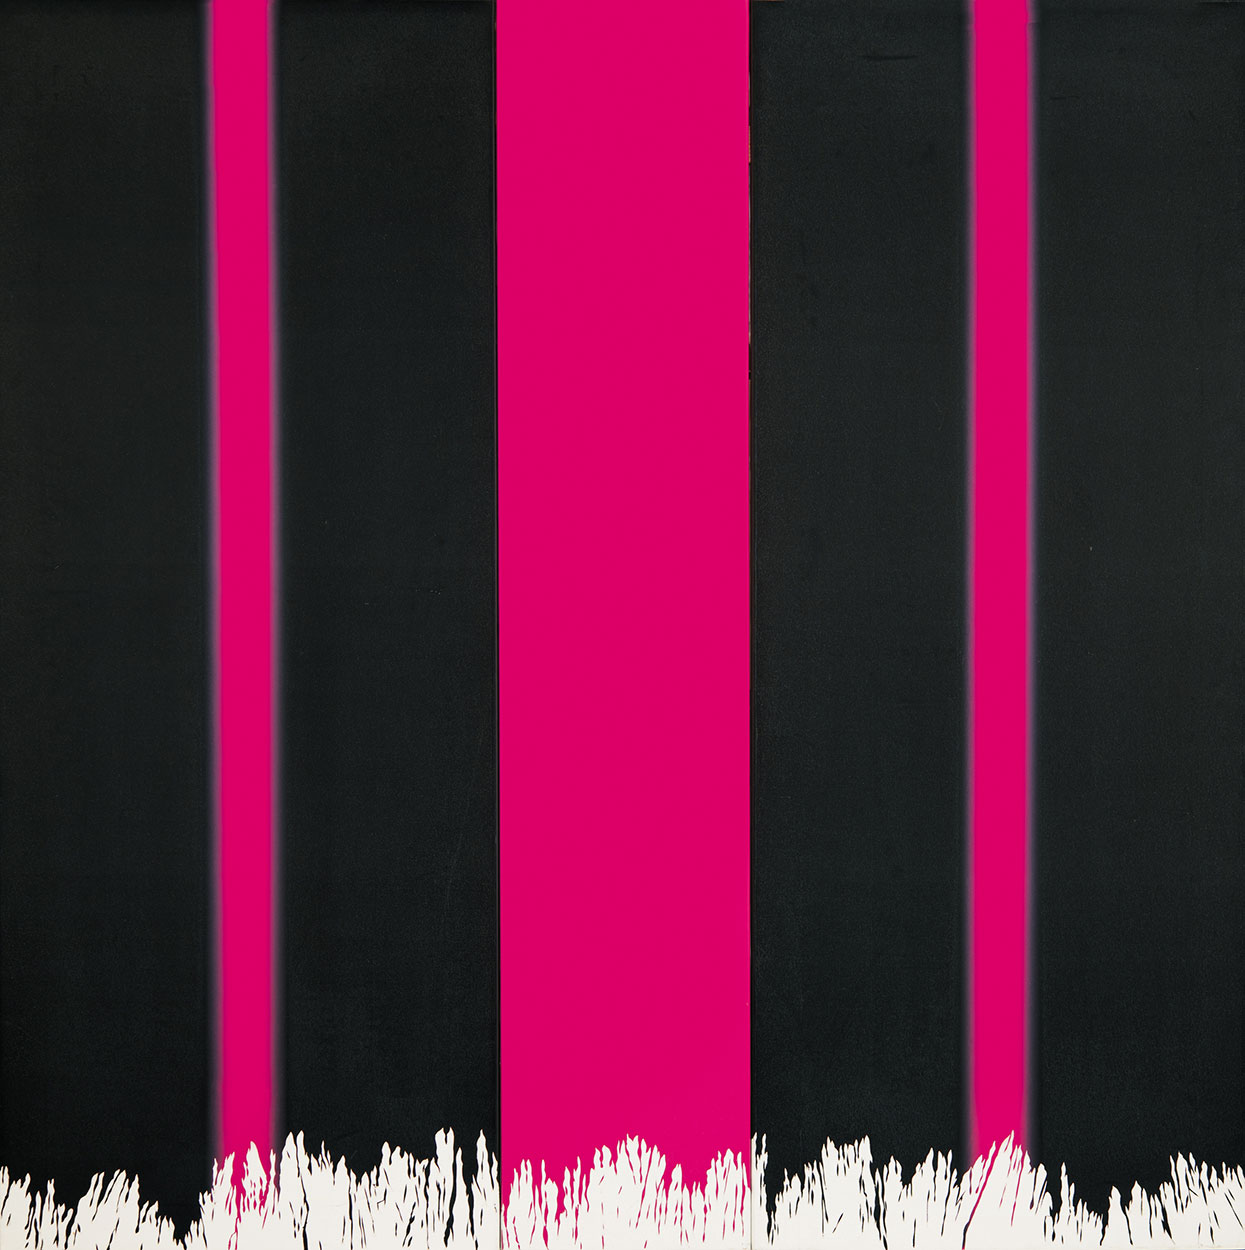 Hencze Tamás (1938-2018) Black and Red Triptych, 2001